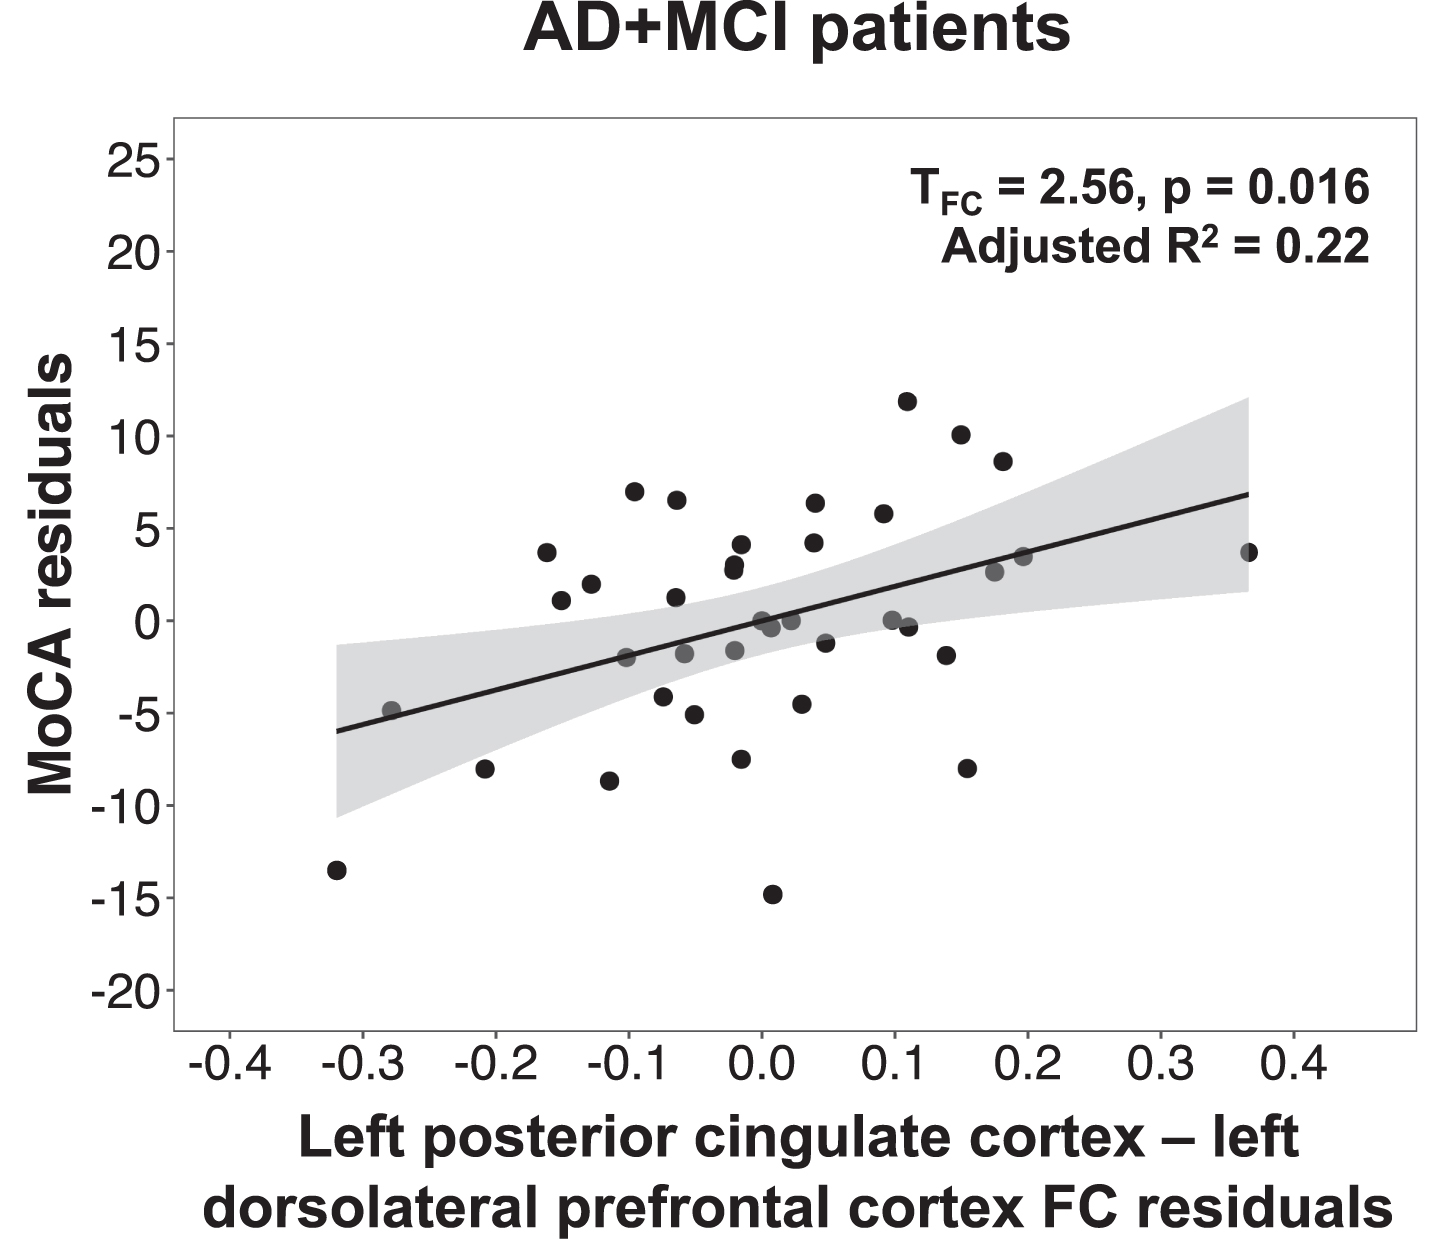 Lower default mode network connectivity in the left dorsolateral prefrontal cortex was associated with lower MoCA scores in AD + MCI patients. Scatterplot indicates association between MoCA residuals and left posterior cingulate cortex-left dorsolateral prefrontal cortex functional connectivity residuals in AD + MCI patients, after controlling for age, sex, years of education, handedness and total intracranial volume. Lower MoCA scores was associated with lower functional connectivity between the left posterior cingulate cortex and left dorsolateral prefrontal cortex in AD + MCI patients. MoCA, Montreal cognitive assessment; AD, Alzheimer’s disease; MCI, mild cognitive impairment; FC, functional connectivity.